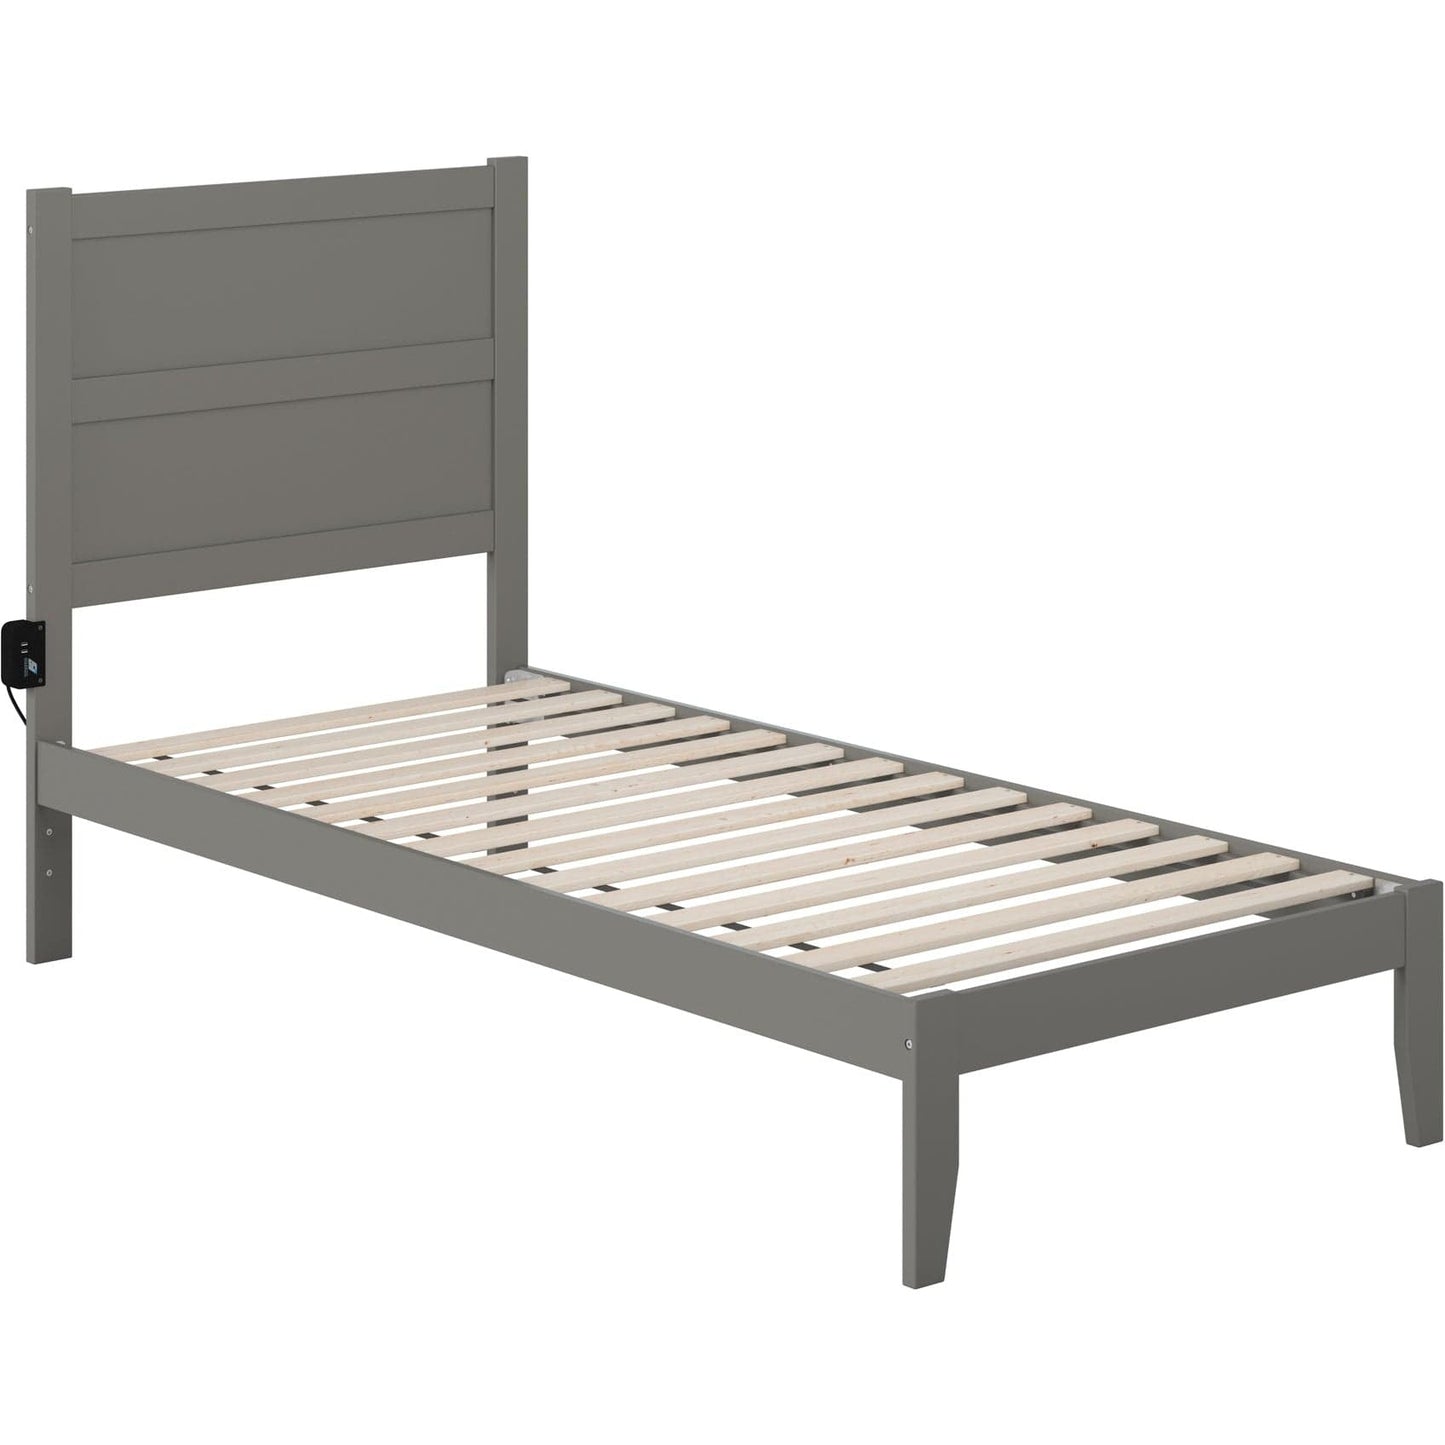 AFI Furnishings NoHo Twin Extra Long Bed in Grey AG9110019